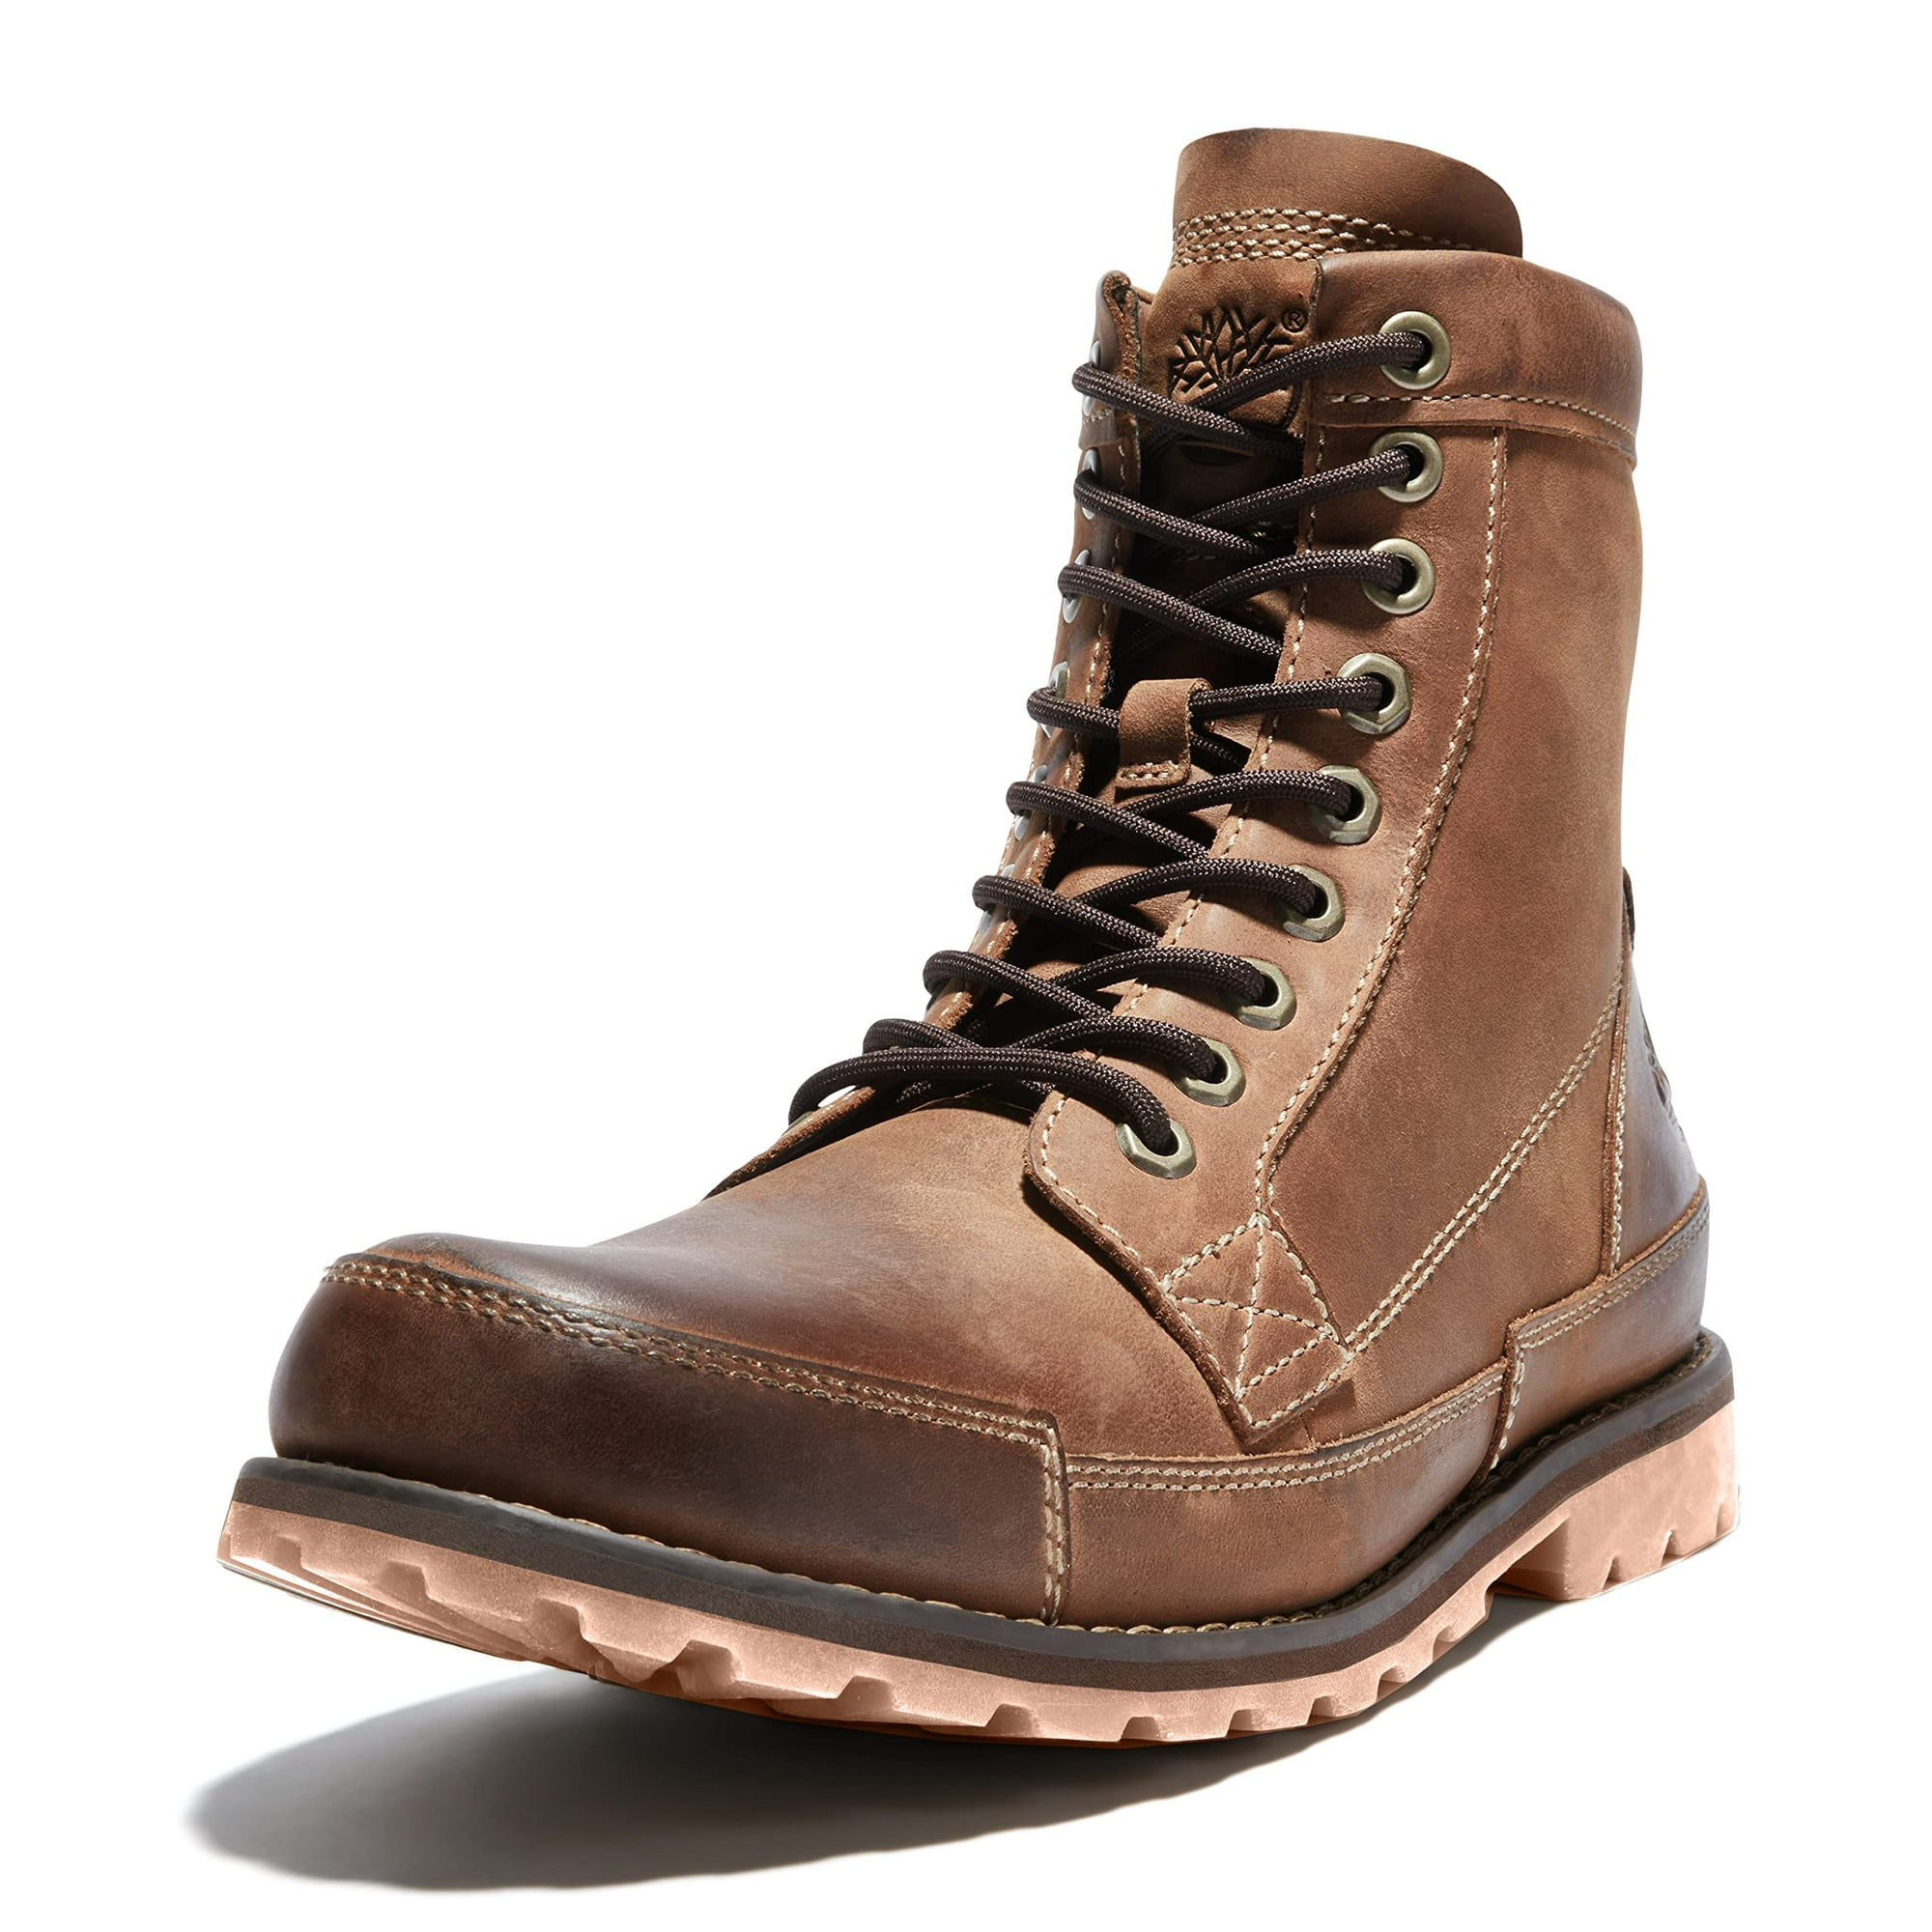 Necesito Completamente seco Innecesario Timberland Men's Earthkeepers 6" Lace-Up Boot, Burnished Brown, 9.5 W US |  Walmart Canada